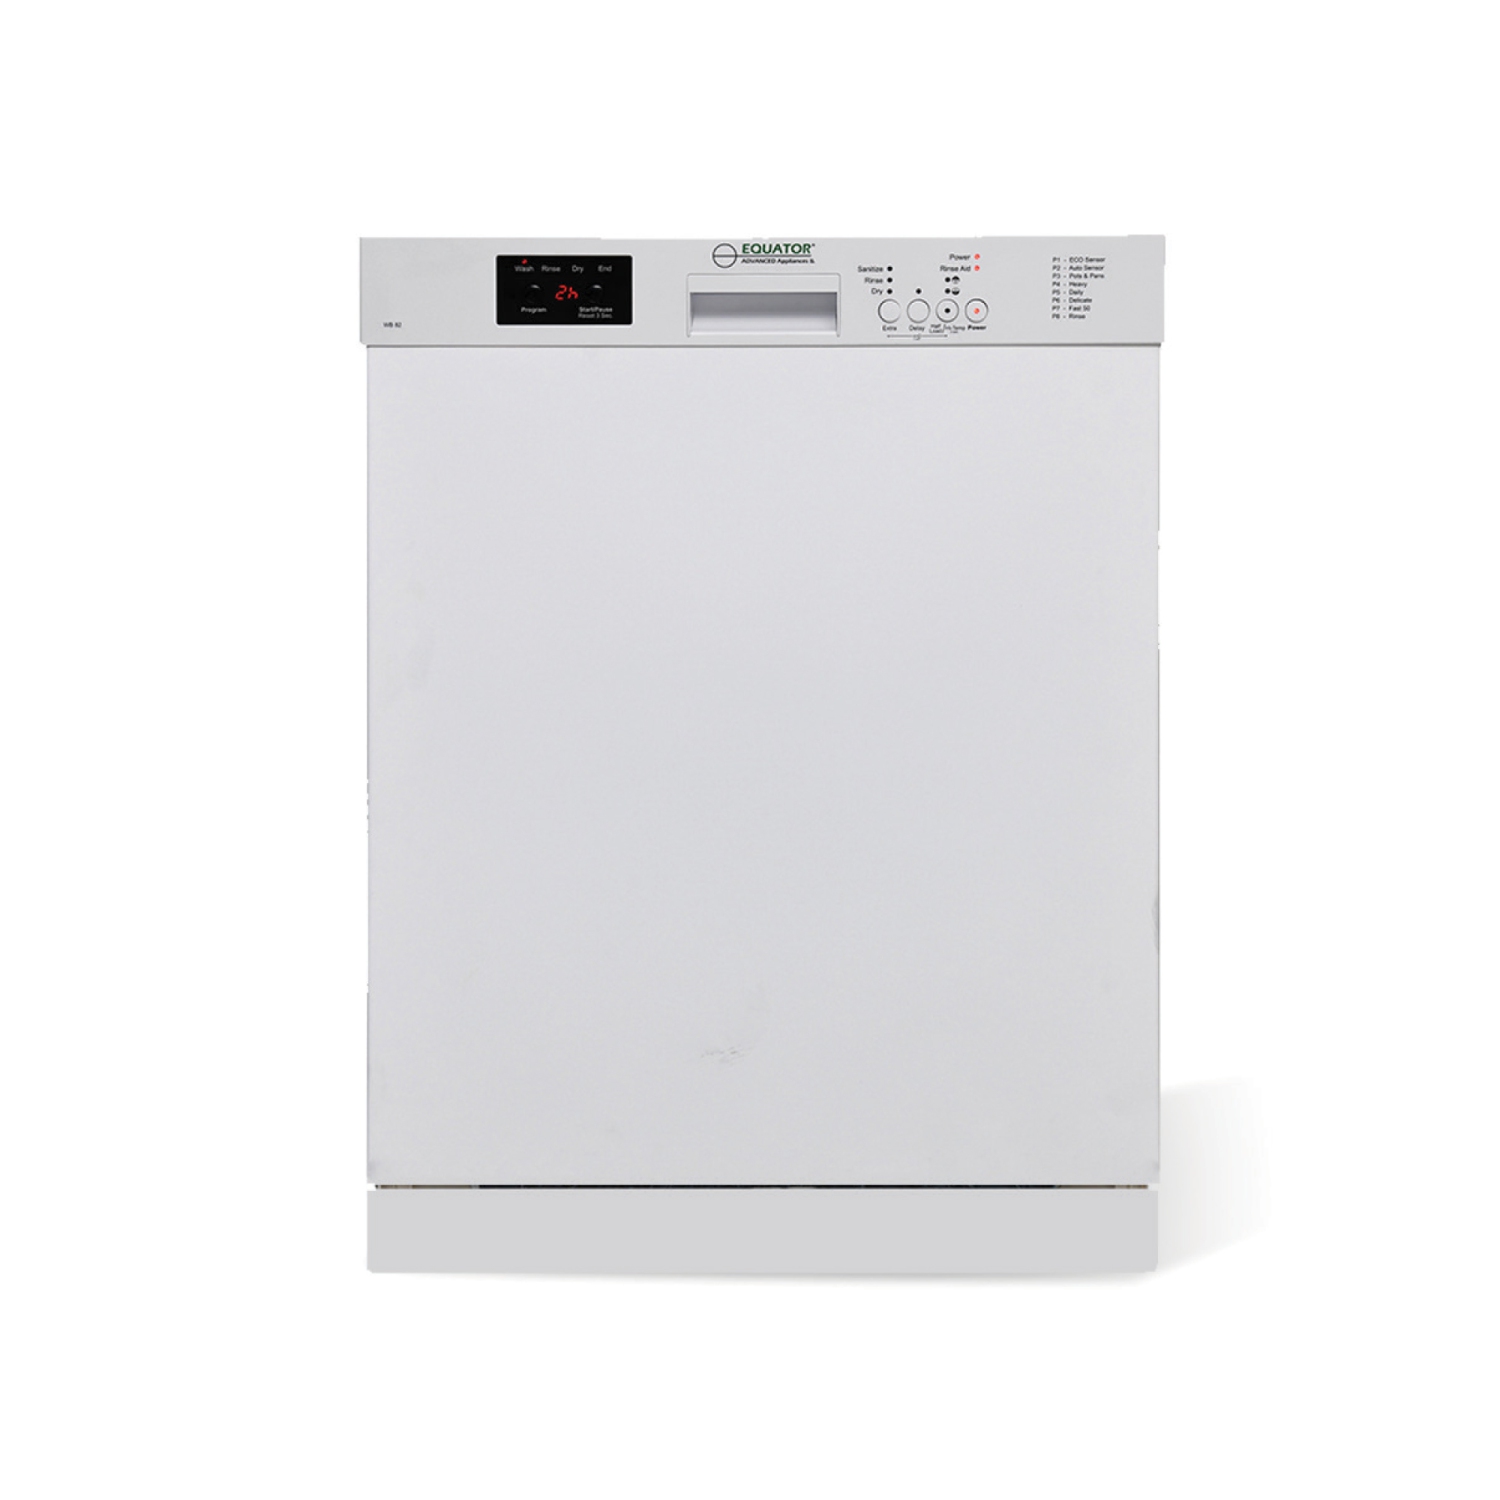 Equator Europe - 24" Built in 14 place Dishwasher in White/Black/Stainless ( WB 82 )